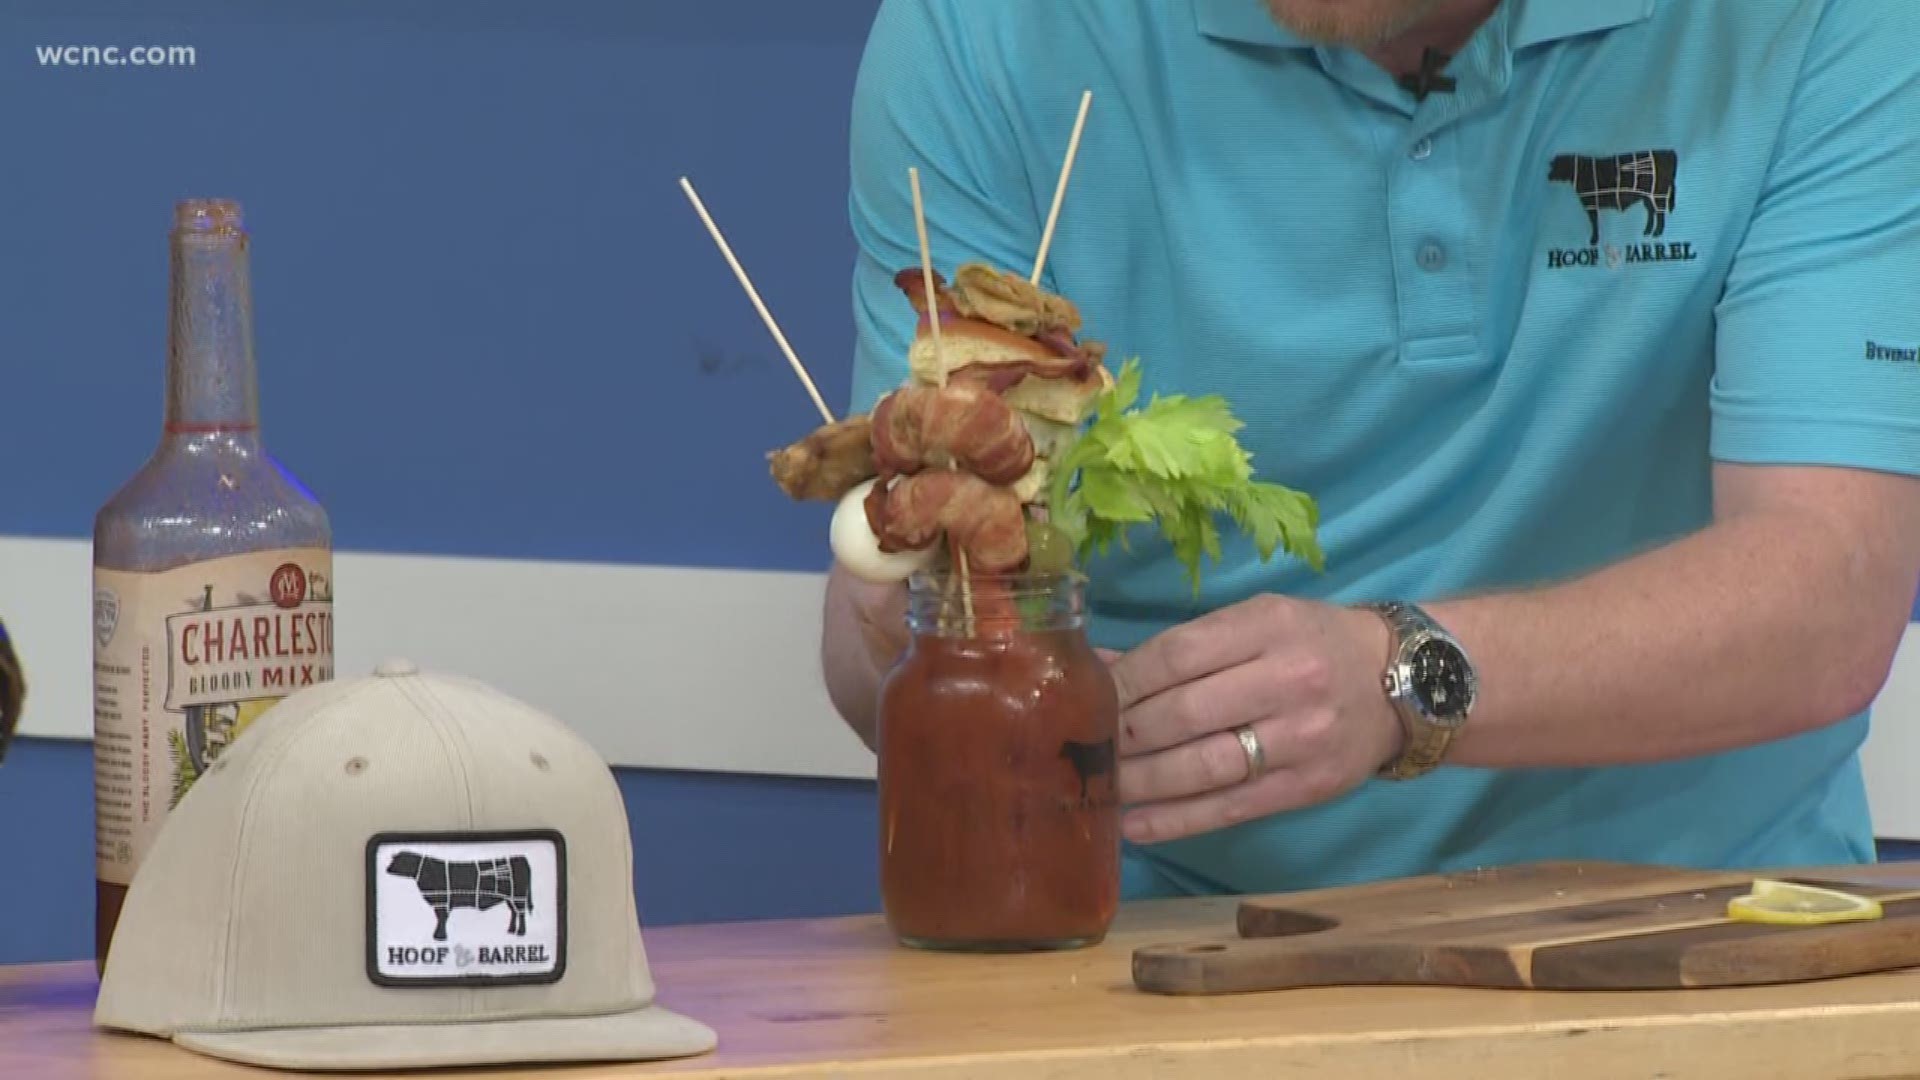 A new restaurant in York, South Carolina called Hoof and Barrel offers a Bloody Mary with extraordinary toppings.